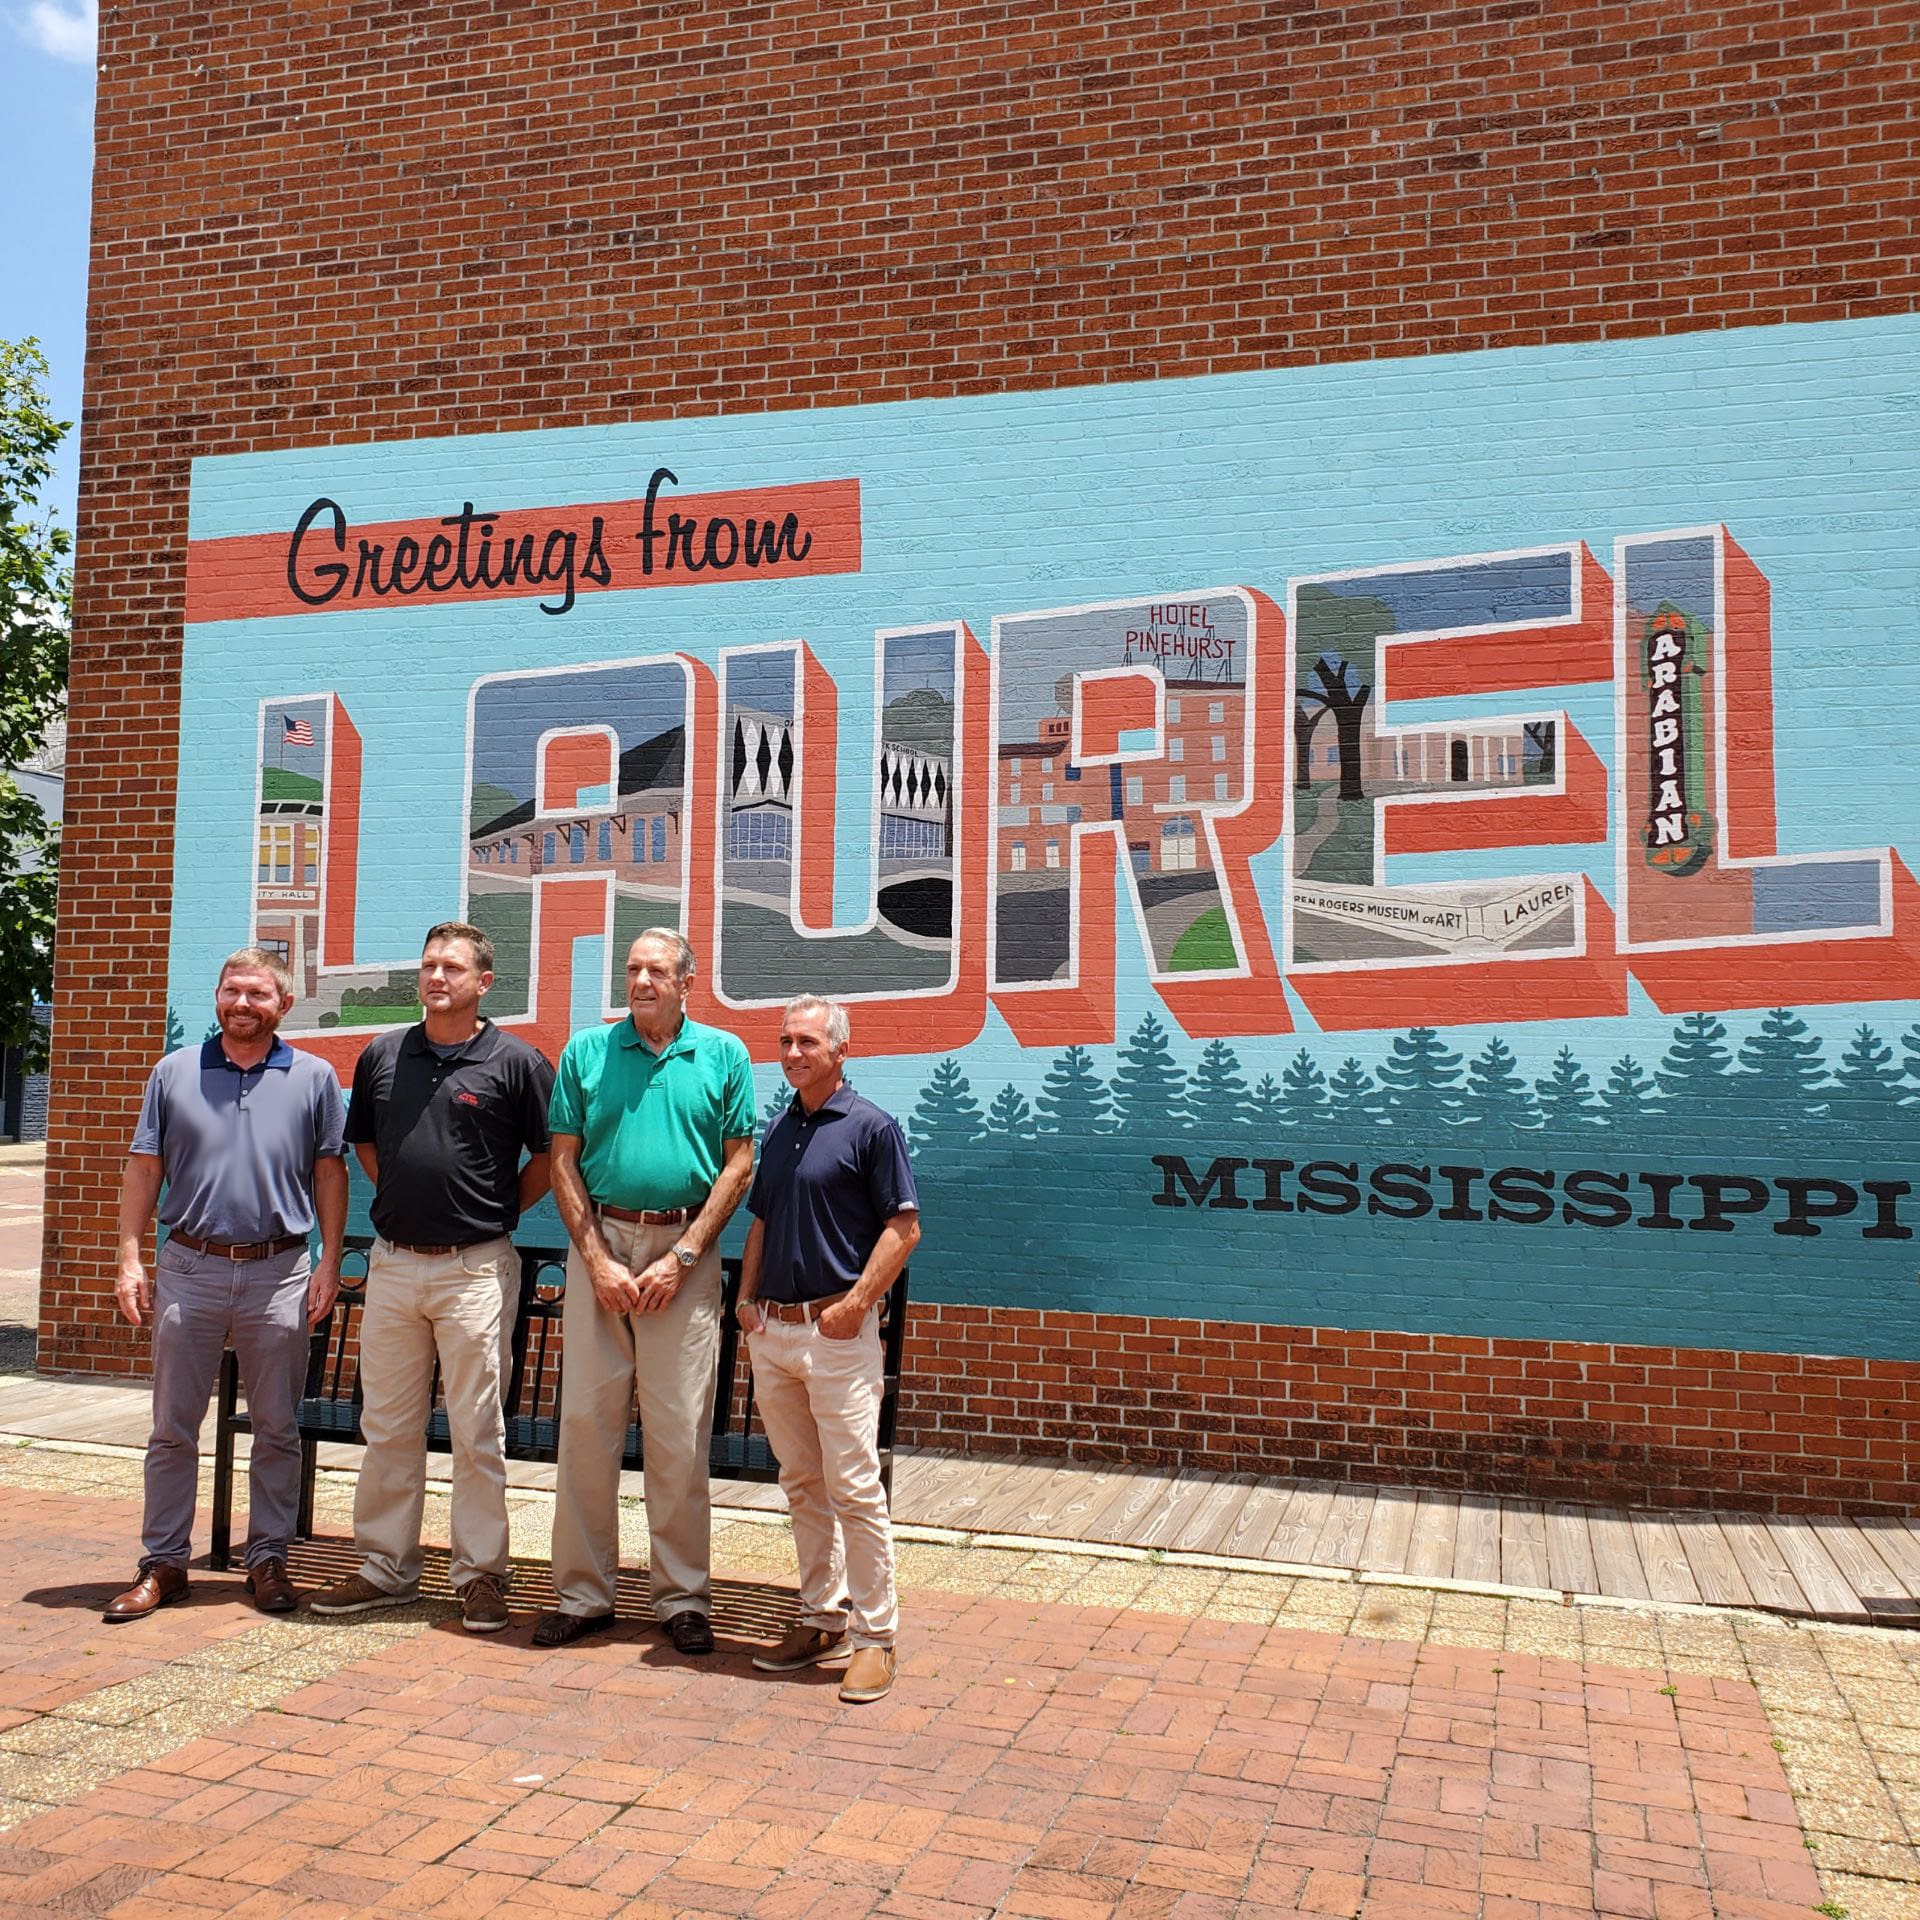 L-R: Director of Operations Joseph Hightower, American Fire President Brian Kenney with father Ralph Kenney, and VP of Business Development Chuck Reimel in front of the Downtown Laurel mural.